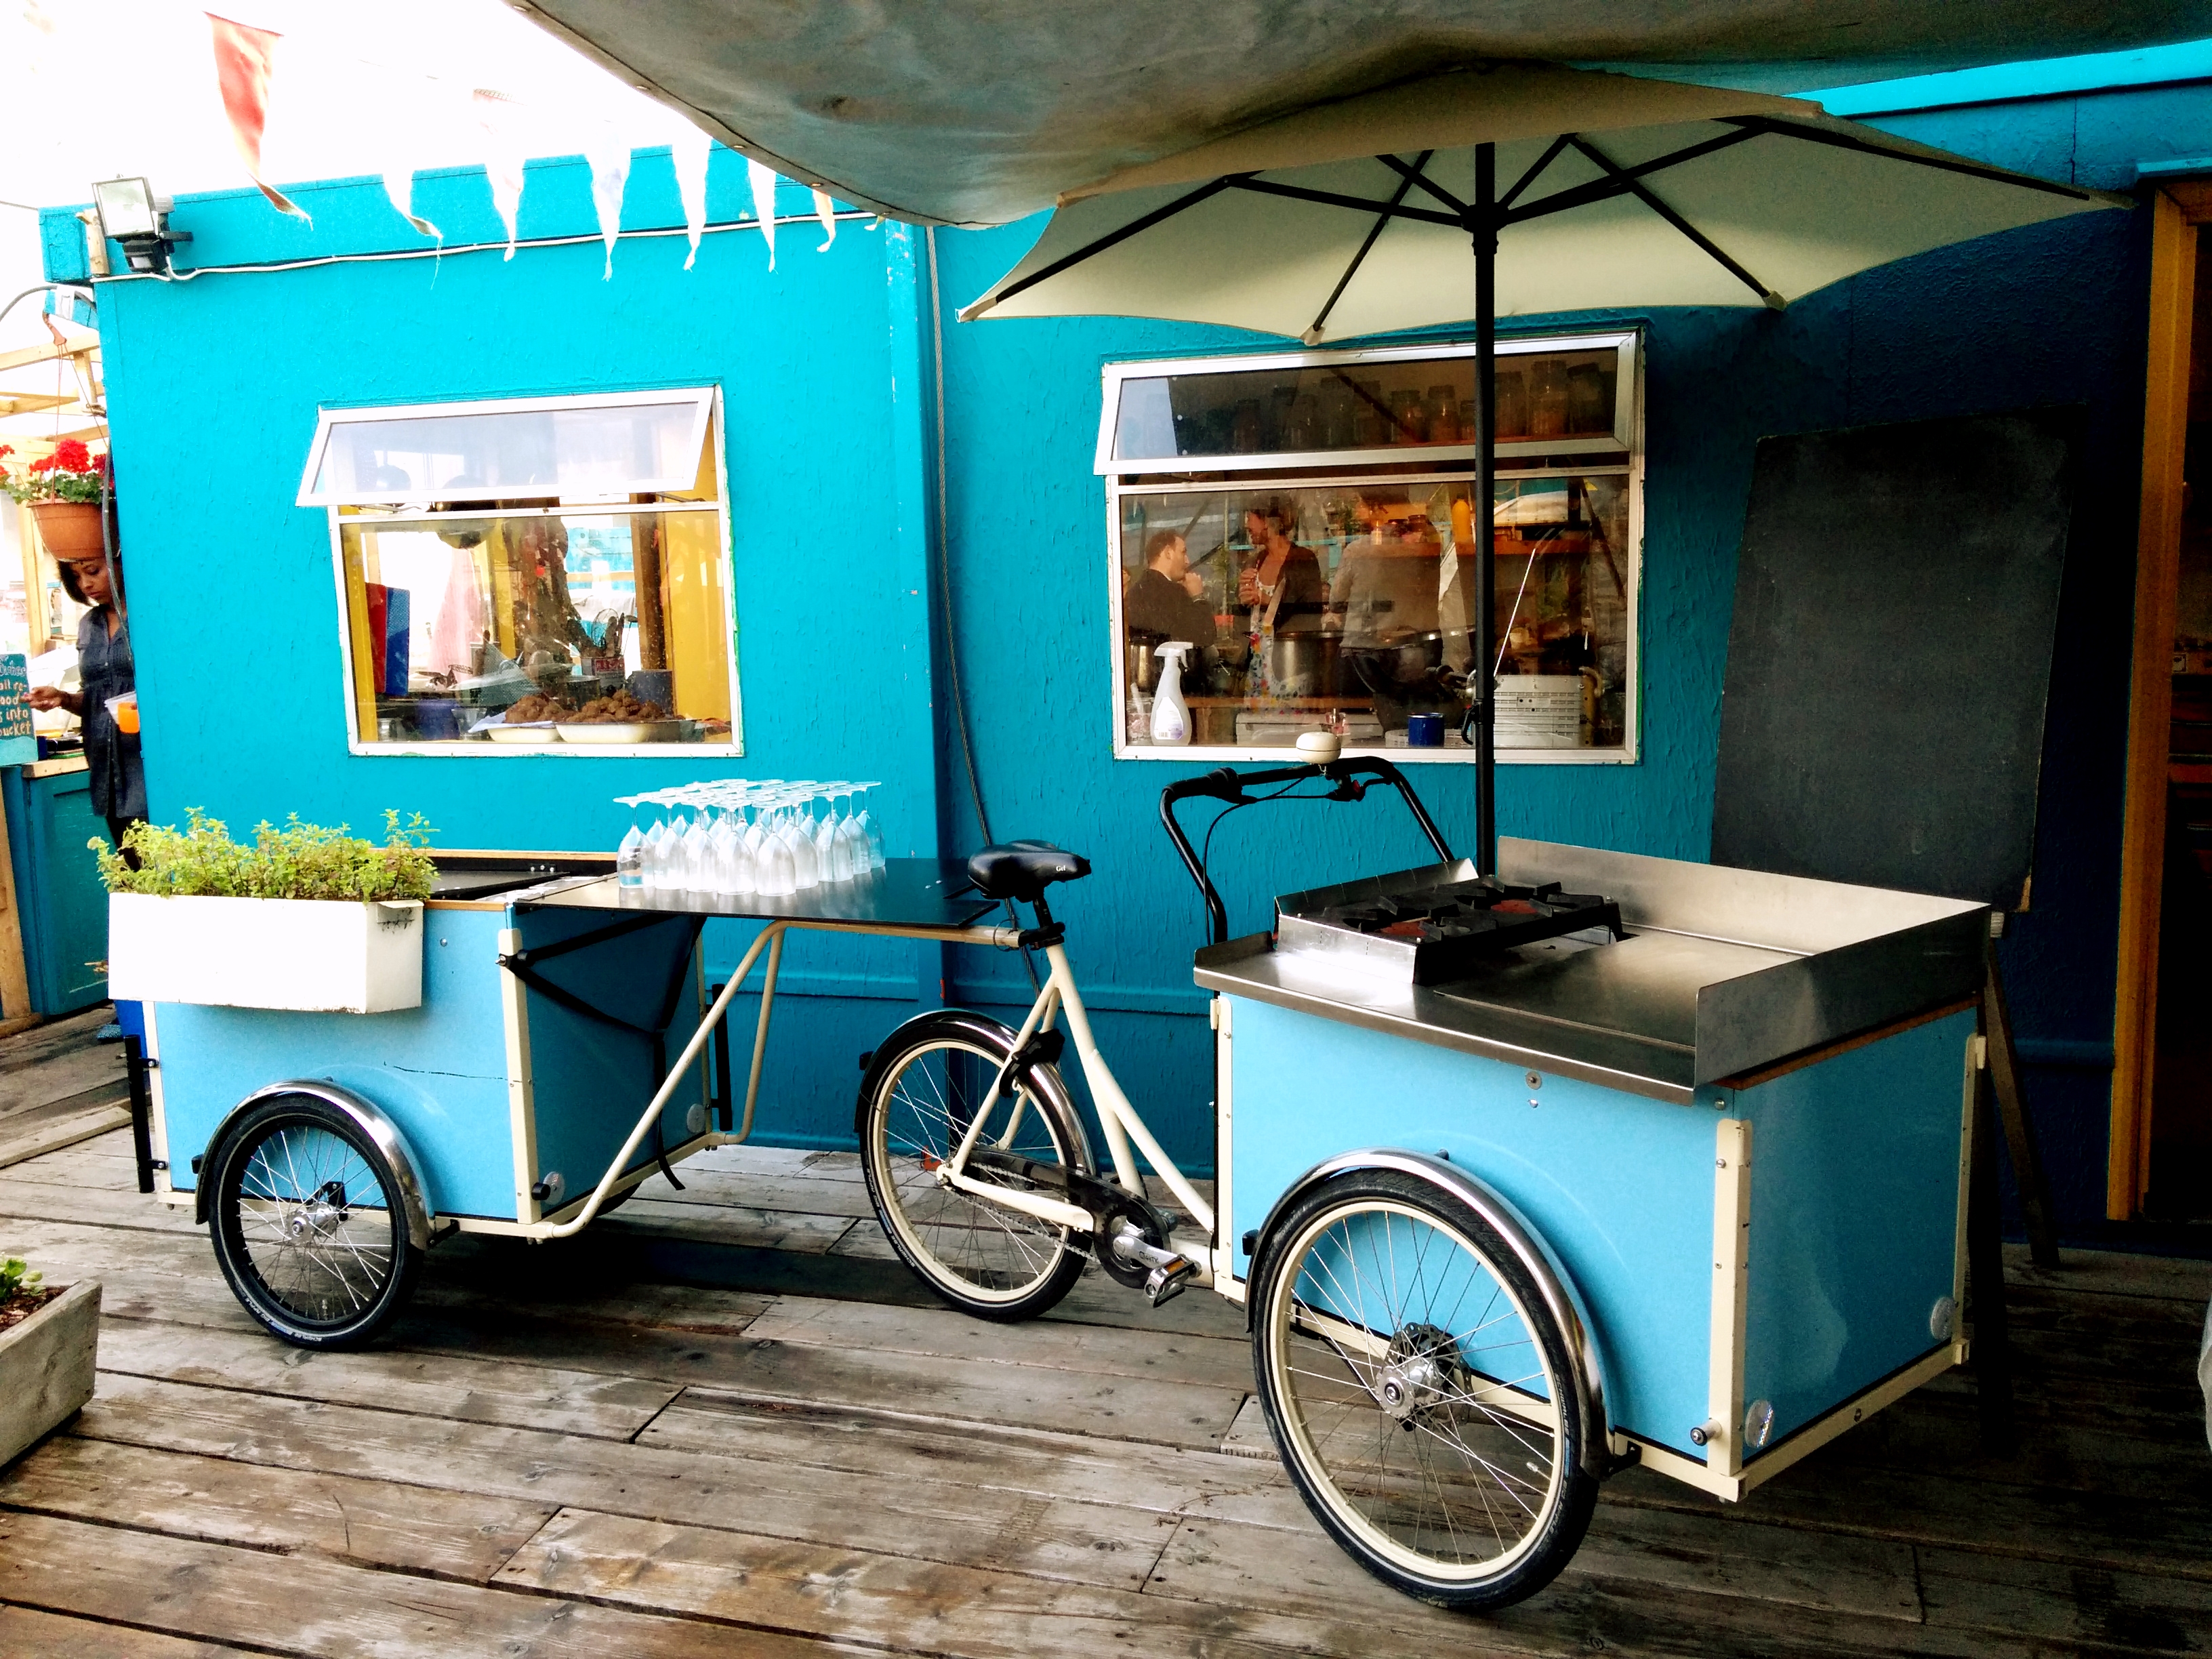 A Christiania cargo bike and its trailer customised for mobile catering